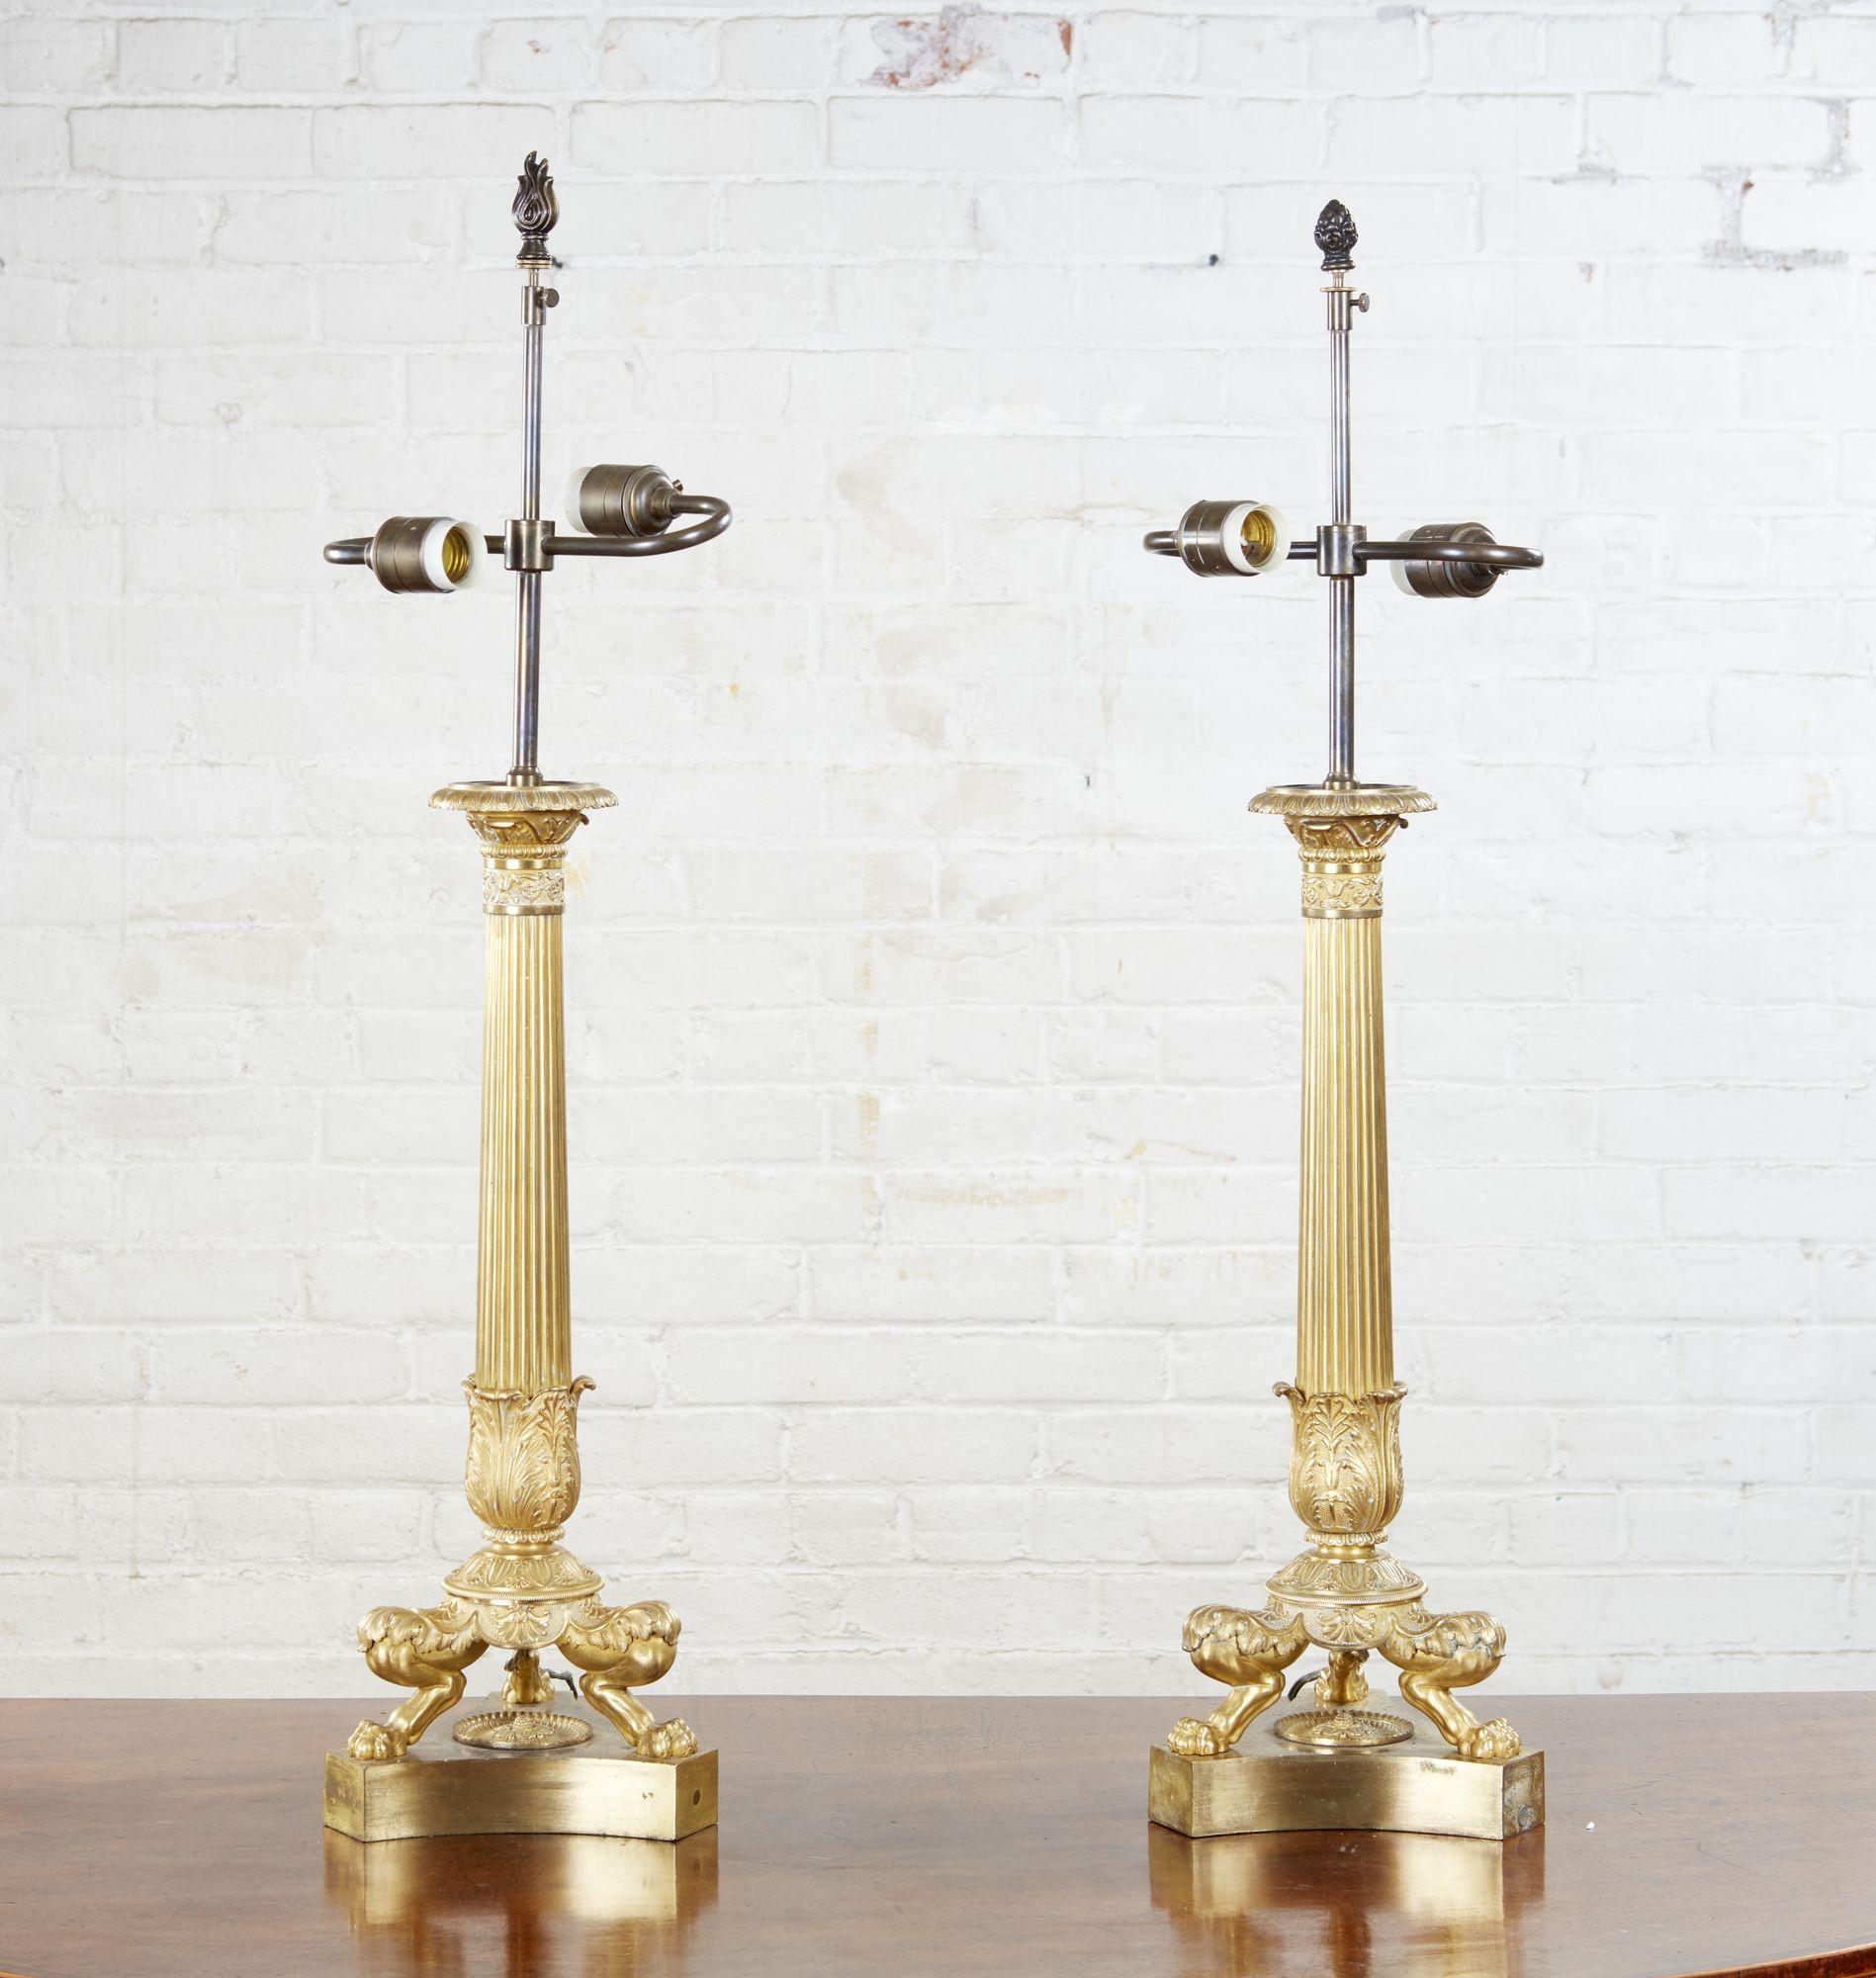 A pair of early 19th century bronze and firegilt candelabrum, now fitted and wired as lamps, with finely chased detail, featuring tapered fluted columns surmounted by an egg and dart decorated capital and with a tulip shaped column mount, over three